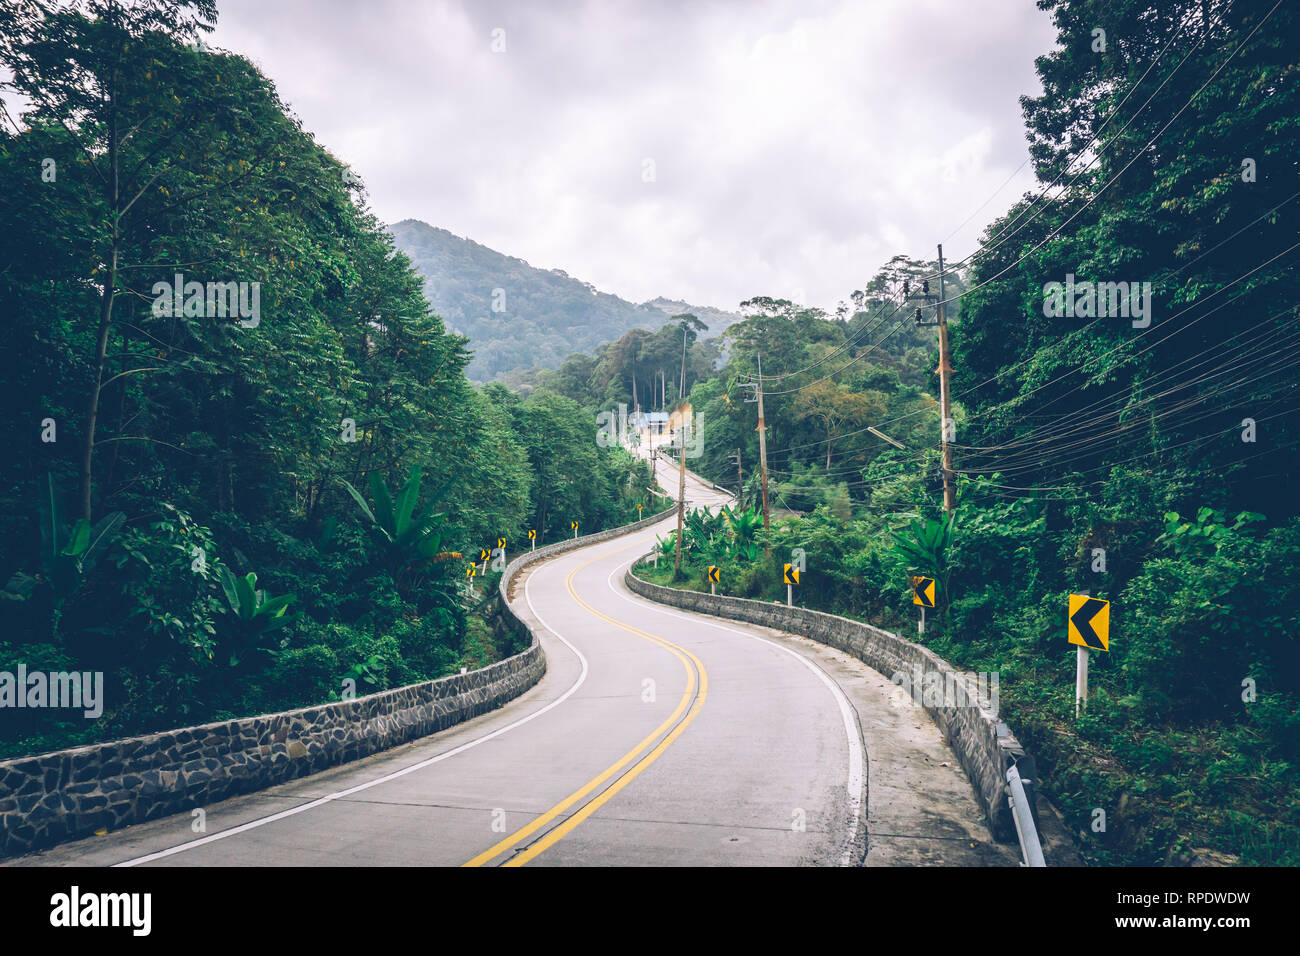 Tropical jungle. Dirt road in the jungle. Thailand, Southeast Asia. Tropical rainforest. Banana palm trees. Landscape view. Stock Photo